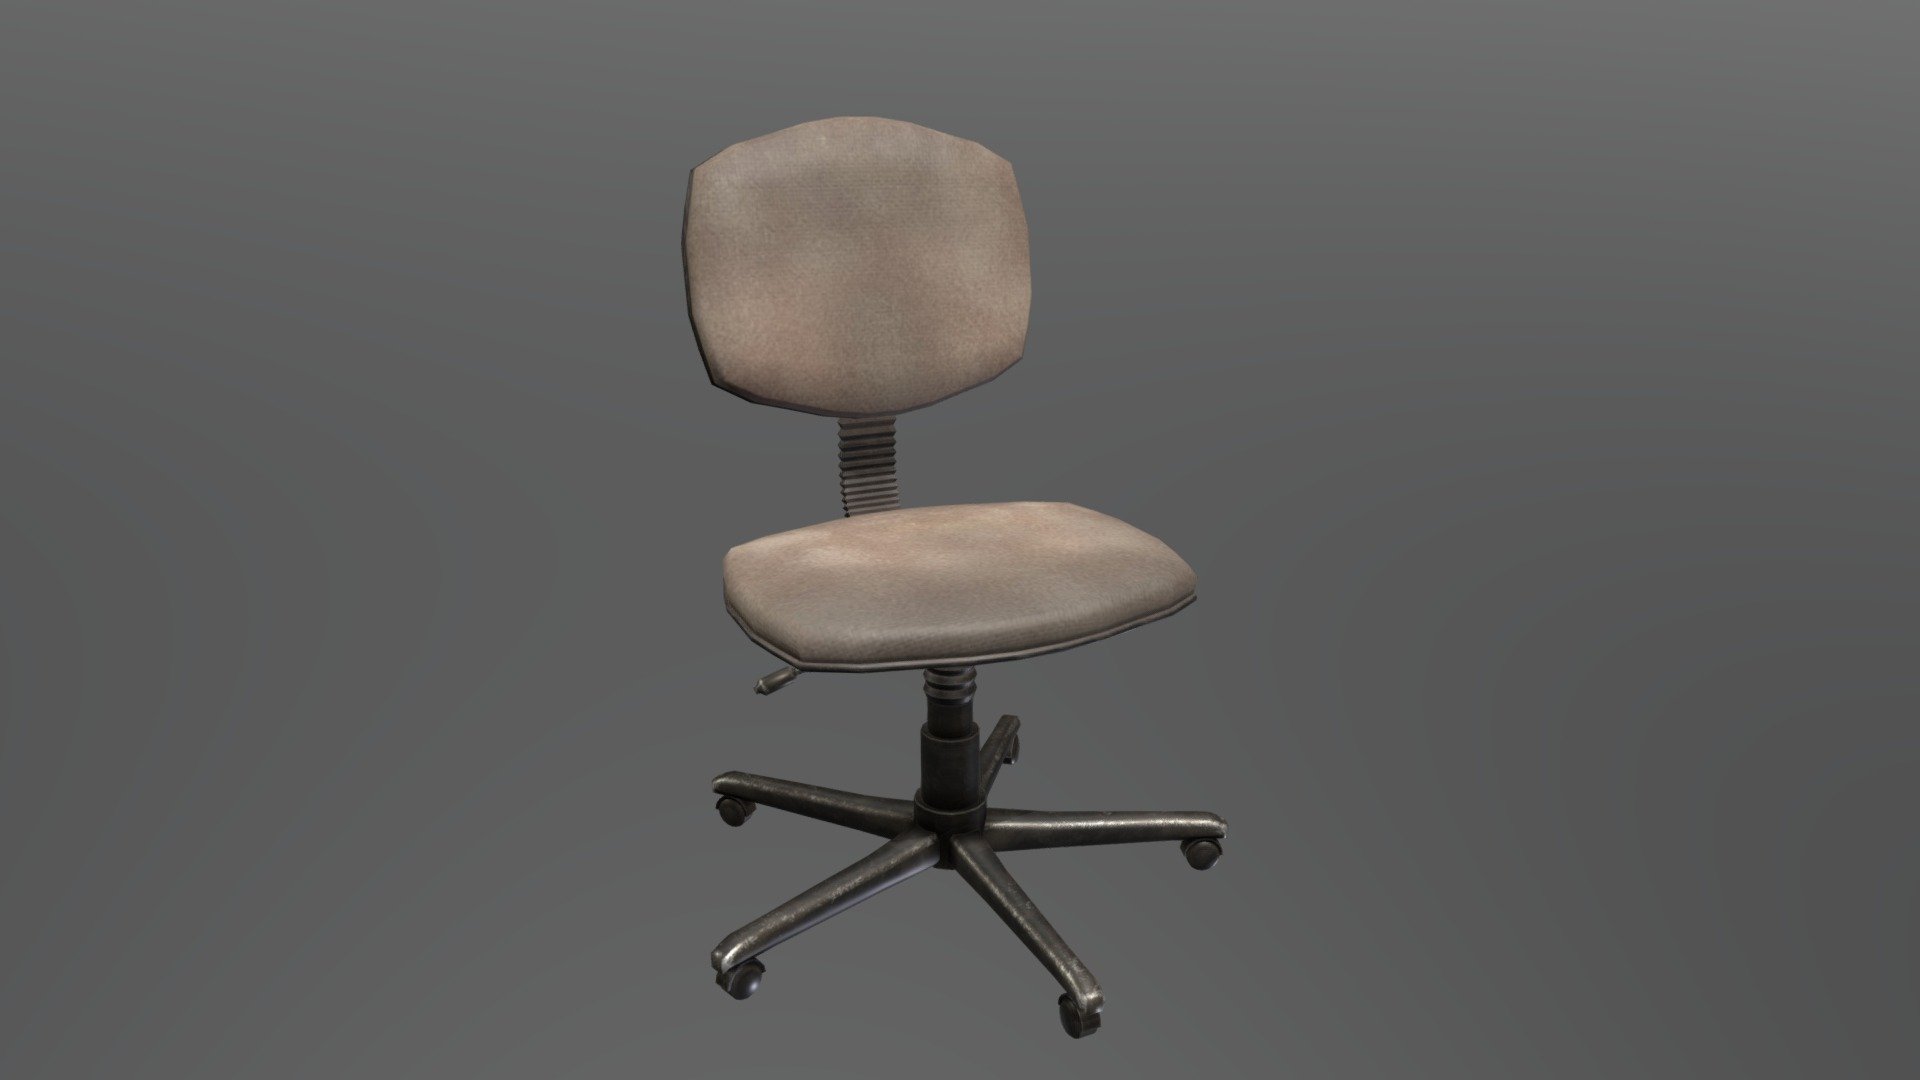 An office chair model based off one in real life. Made primarily as practice with Substance Designer and Painter.

Mesh made in 3ds Max and textures created in Substance Designer + Painter.

Low poly mesh, and ready for game use or even for architectural scenes 3d model